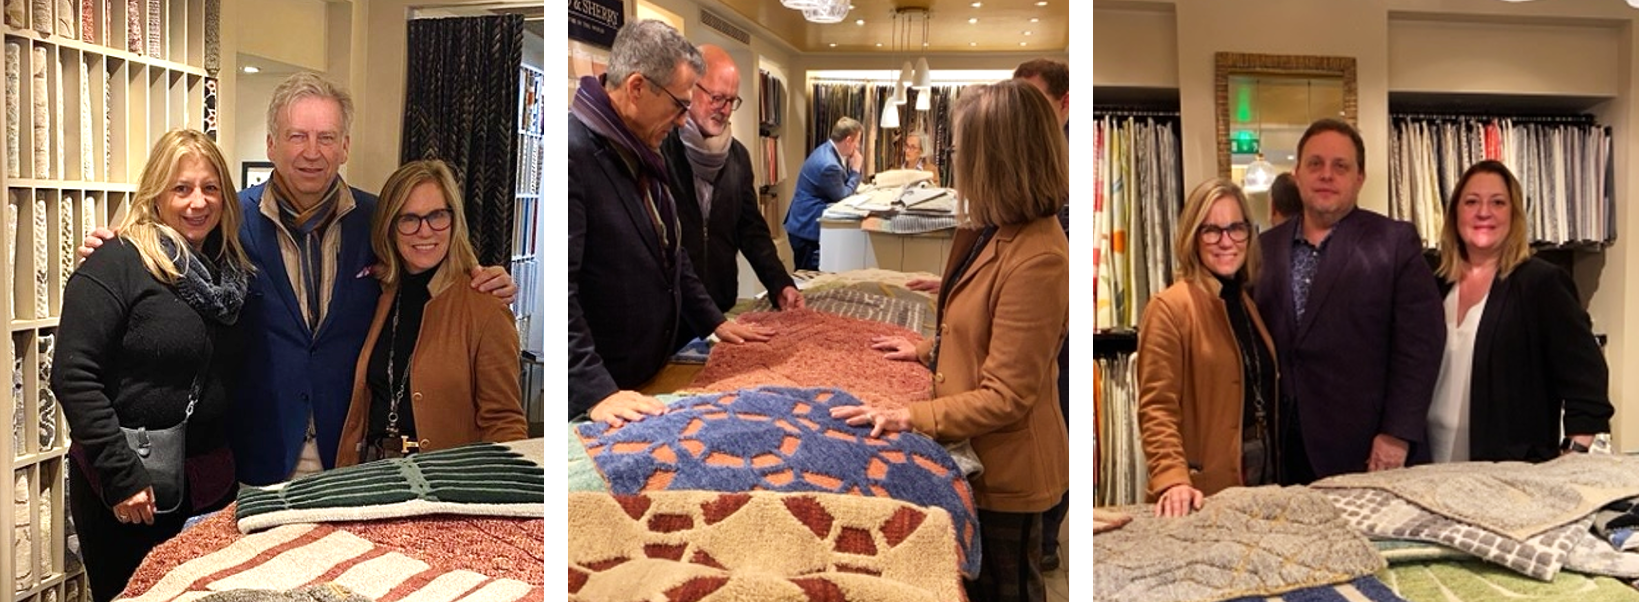 Joni Vanderslice designs several product categories under license to Holland & Sherry Rugs and is shown here with Kate and Wayne Consolio and rugs samples from her eponymous collection